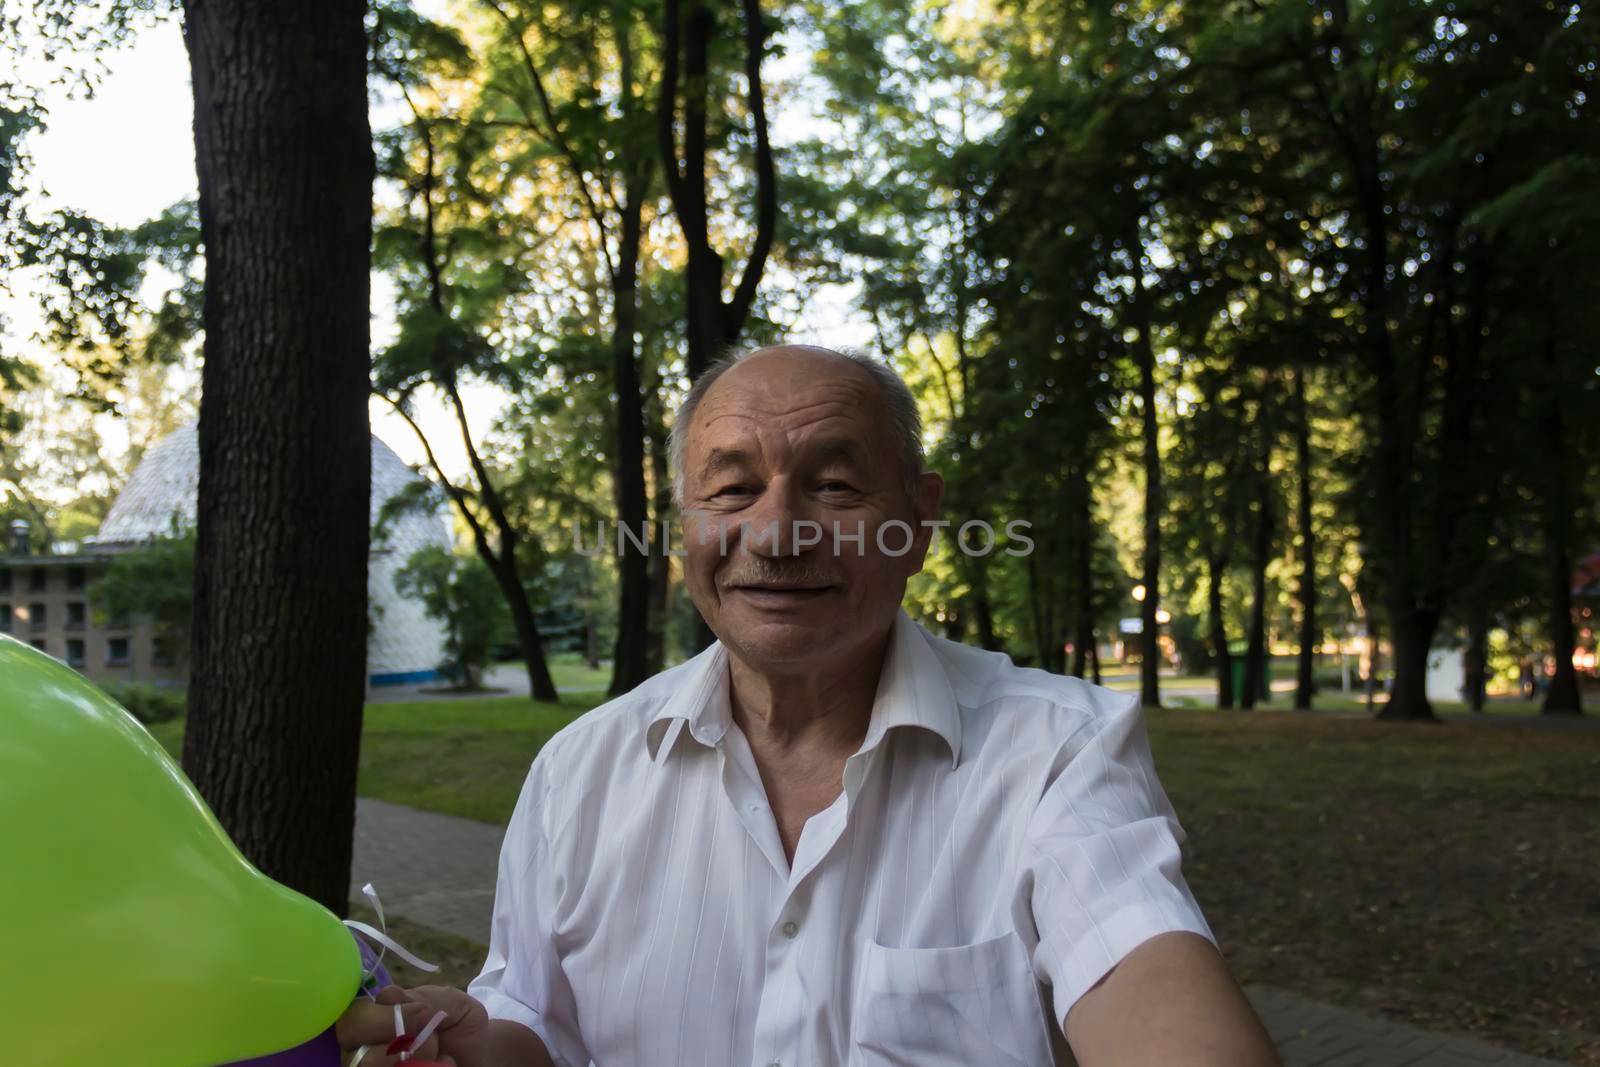 An elderly man with a smile on his face and bright balloons makes a selfie in the park.